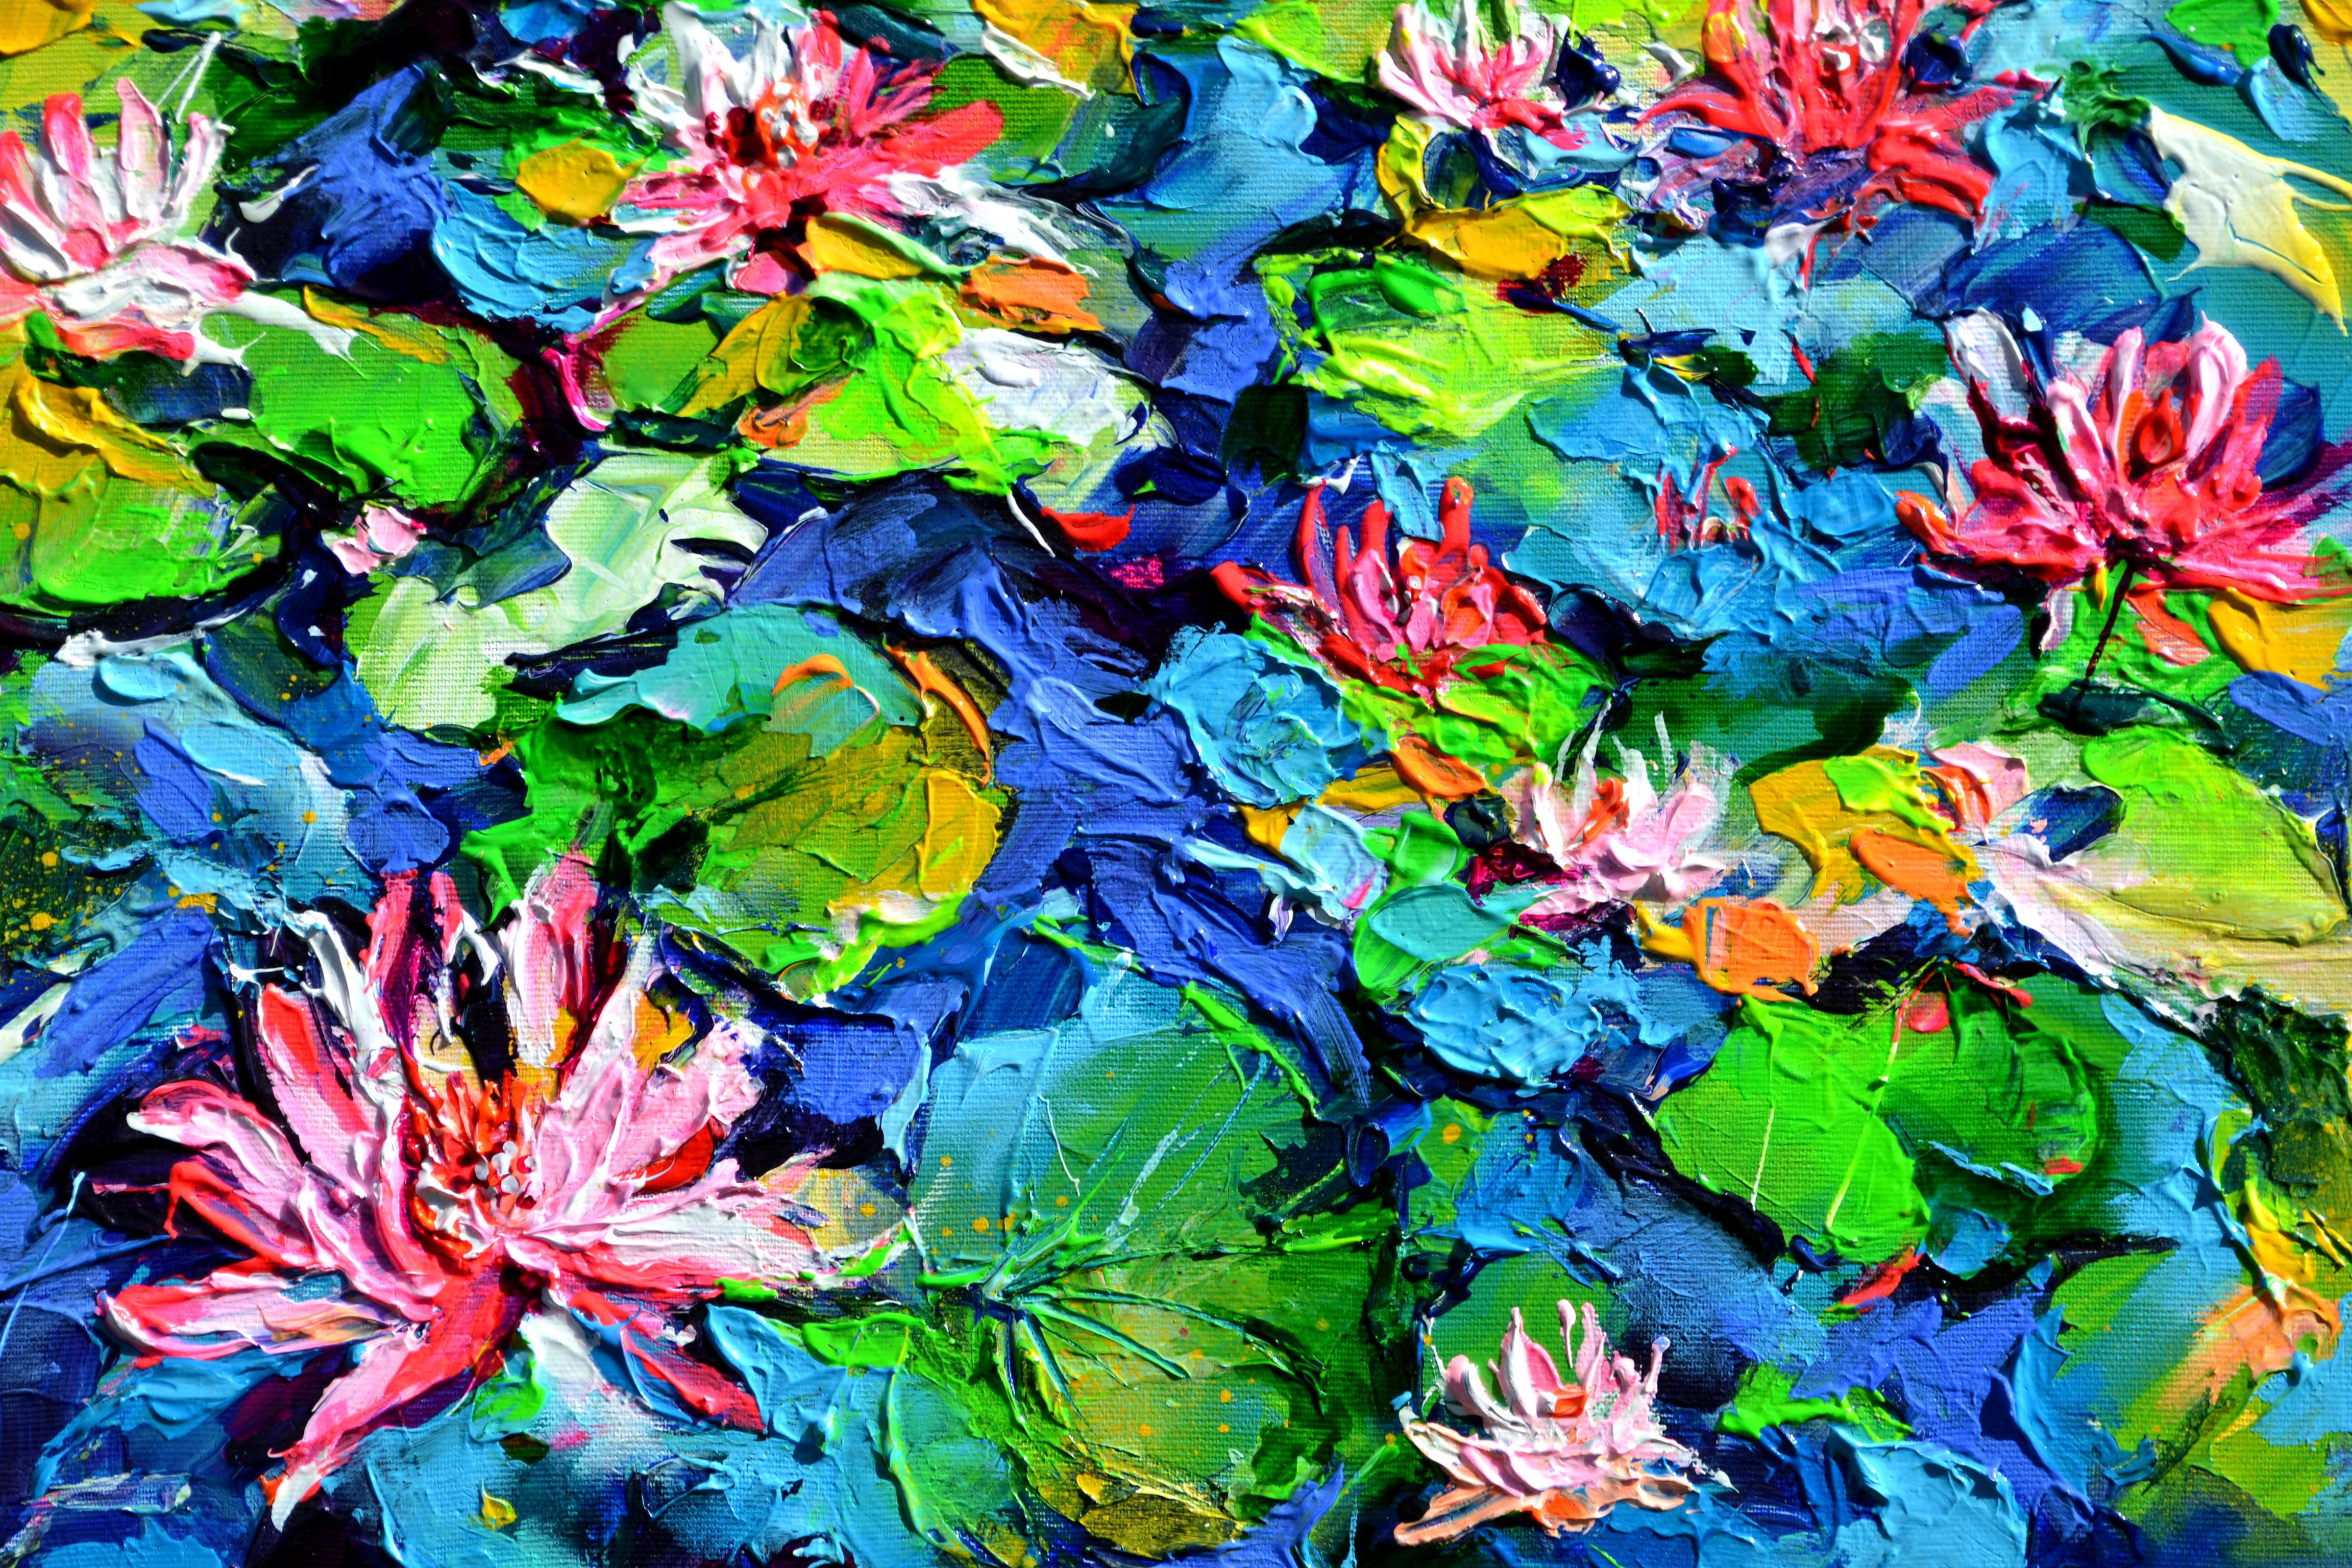 Red Water Lilies on the Pond 2 - Impressionist Painting by Soos Roxana Gabriela